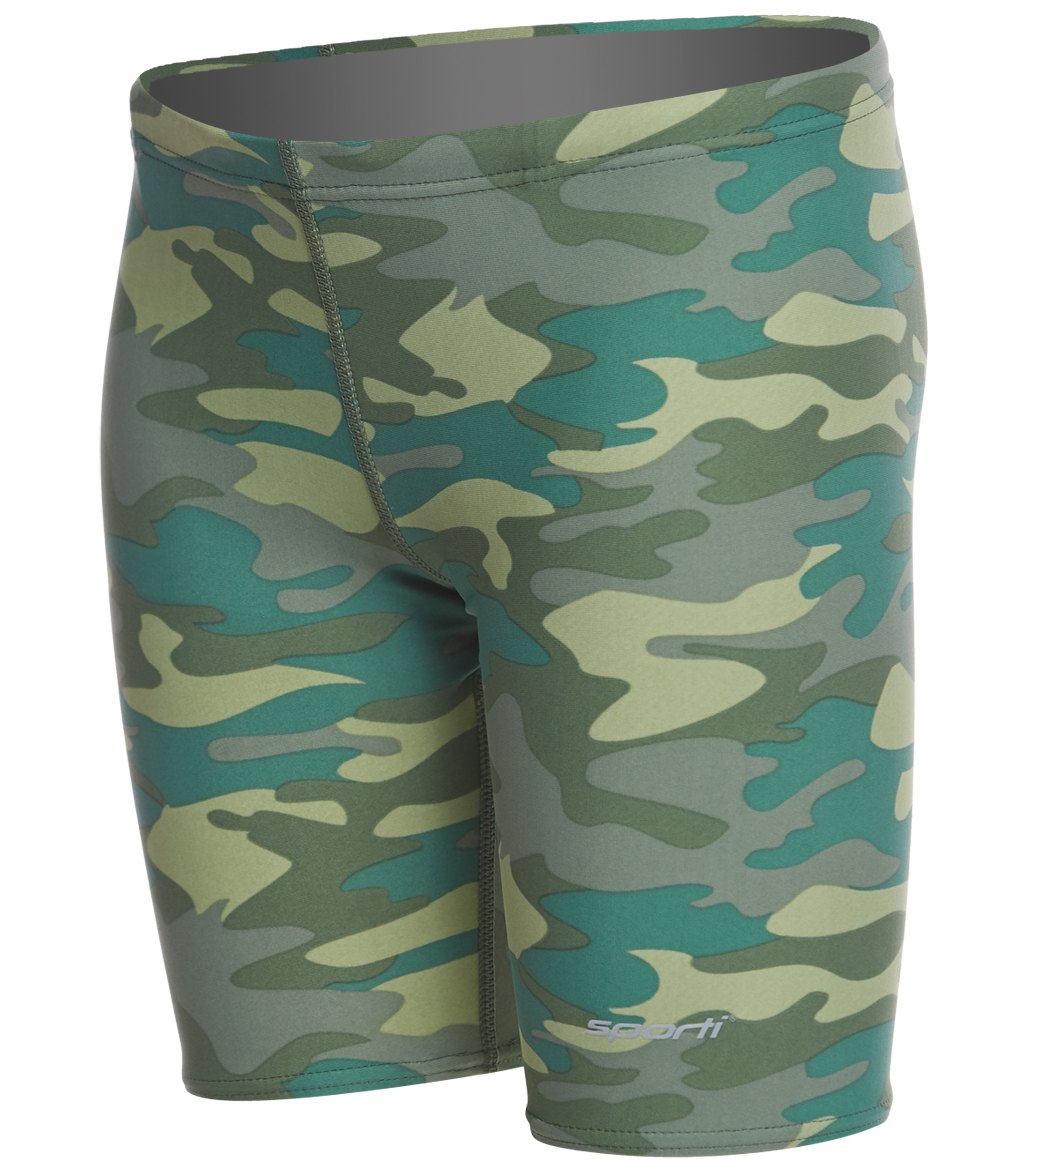 Sporti Camouflage Jammer Swimsuit Youth (22-28) at SwimOutlet.com